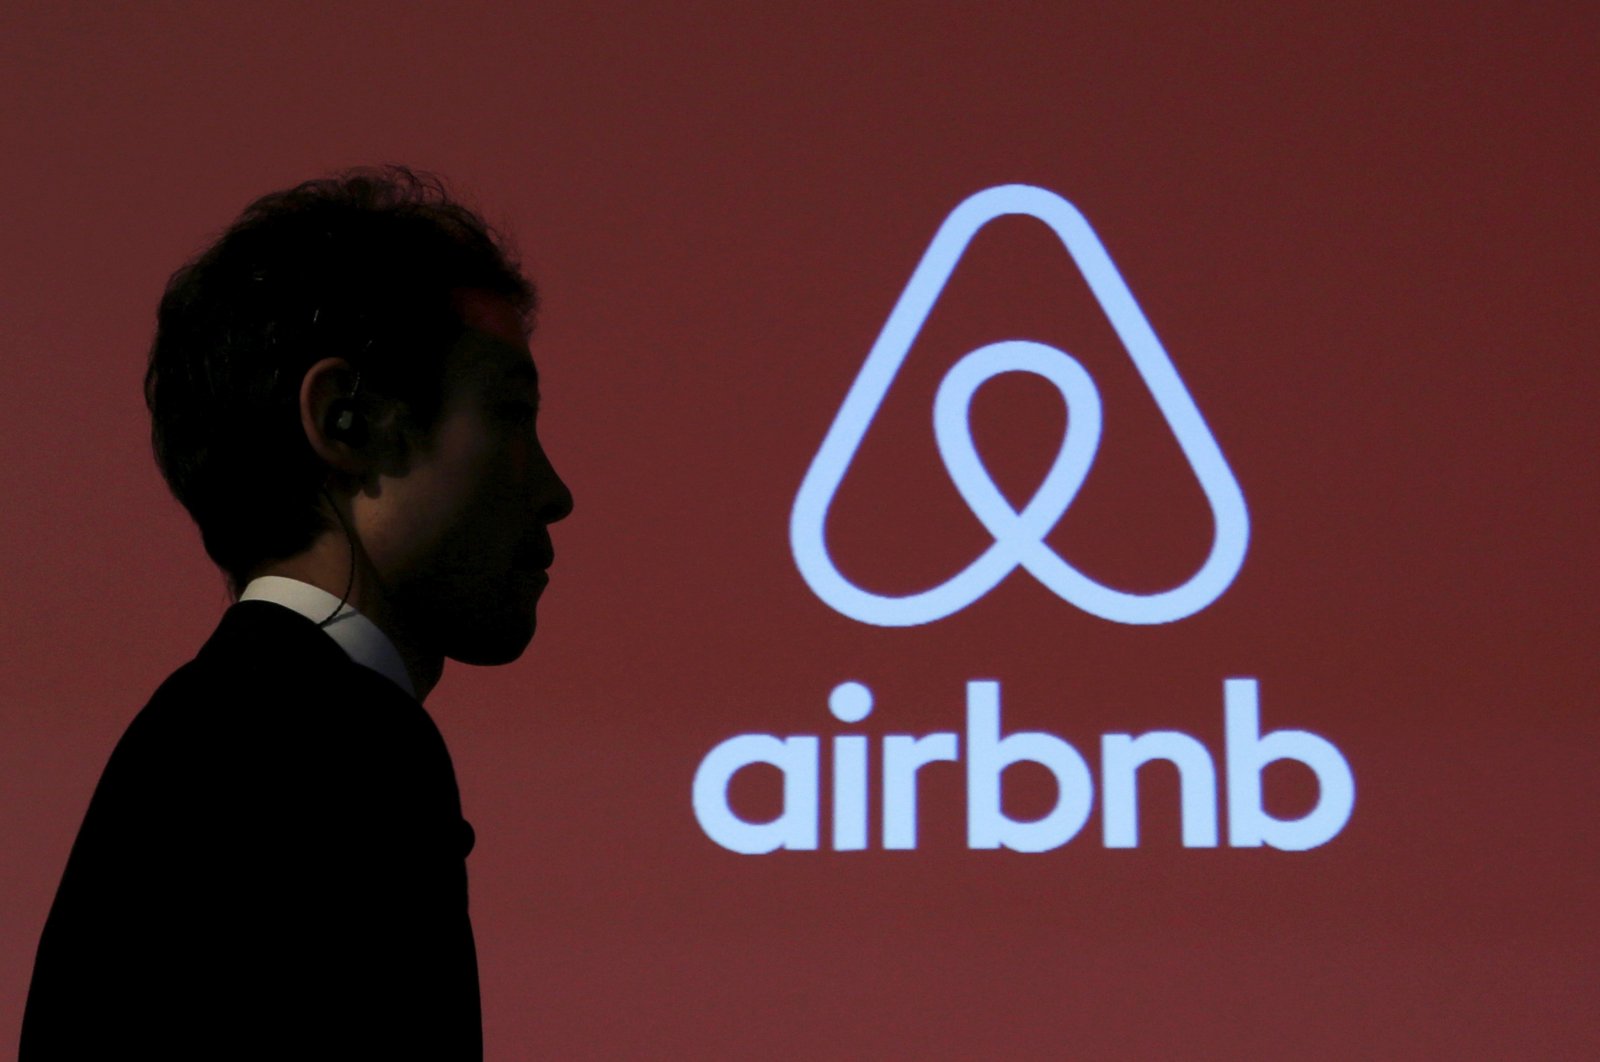 A man walks past a logo of Airbnb after a news conference in Tokyo, Japan, Nov. 26, 2015. (Reuters Photo)